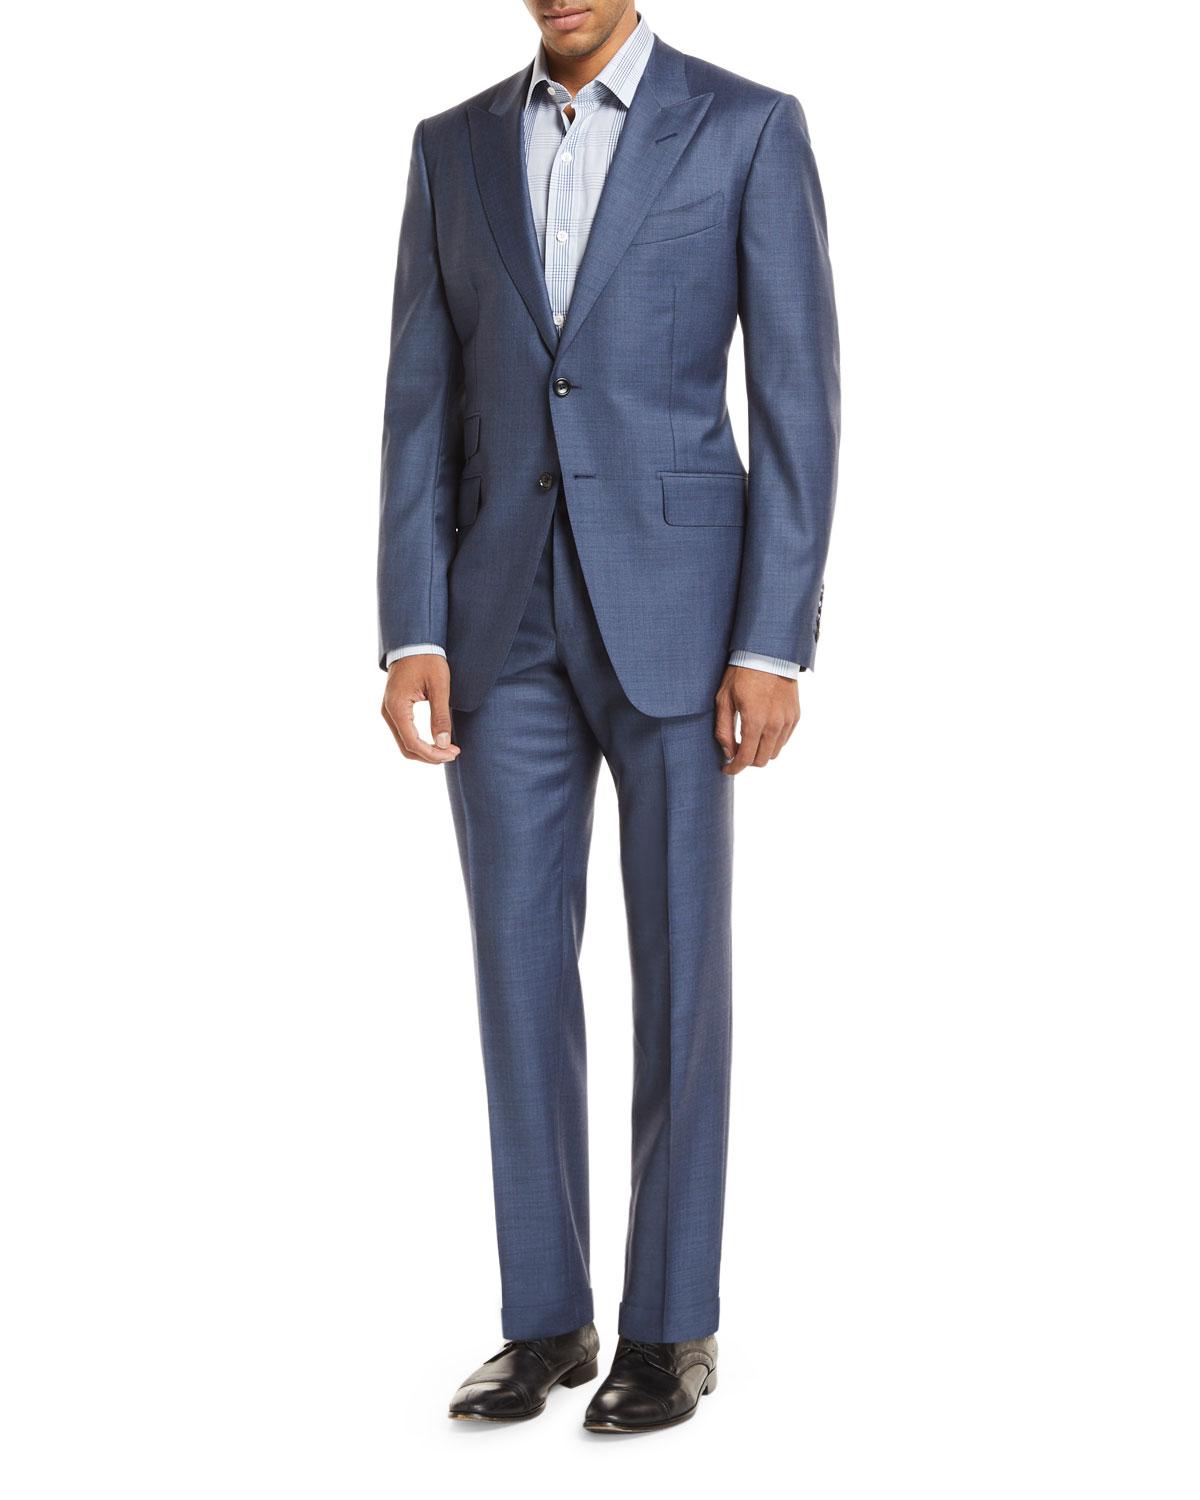 Lyst - Tom Ford Sharkskin Wool Two-piece Suit in Blue for Men